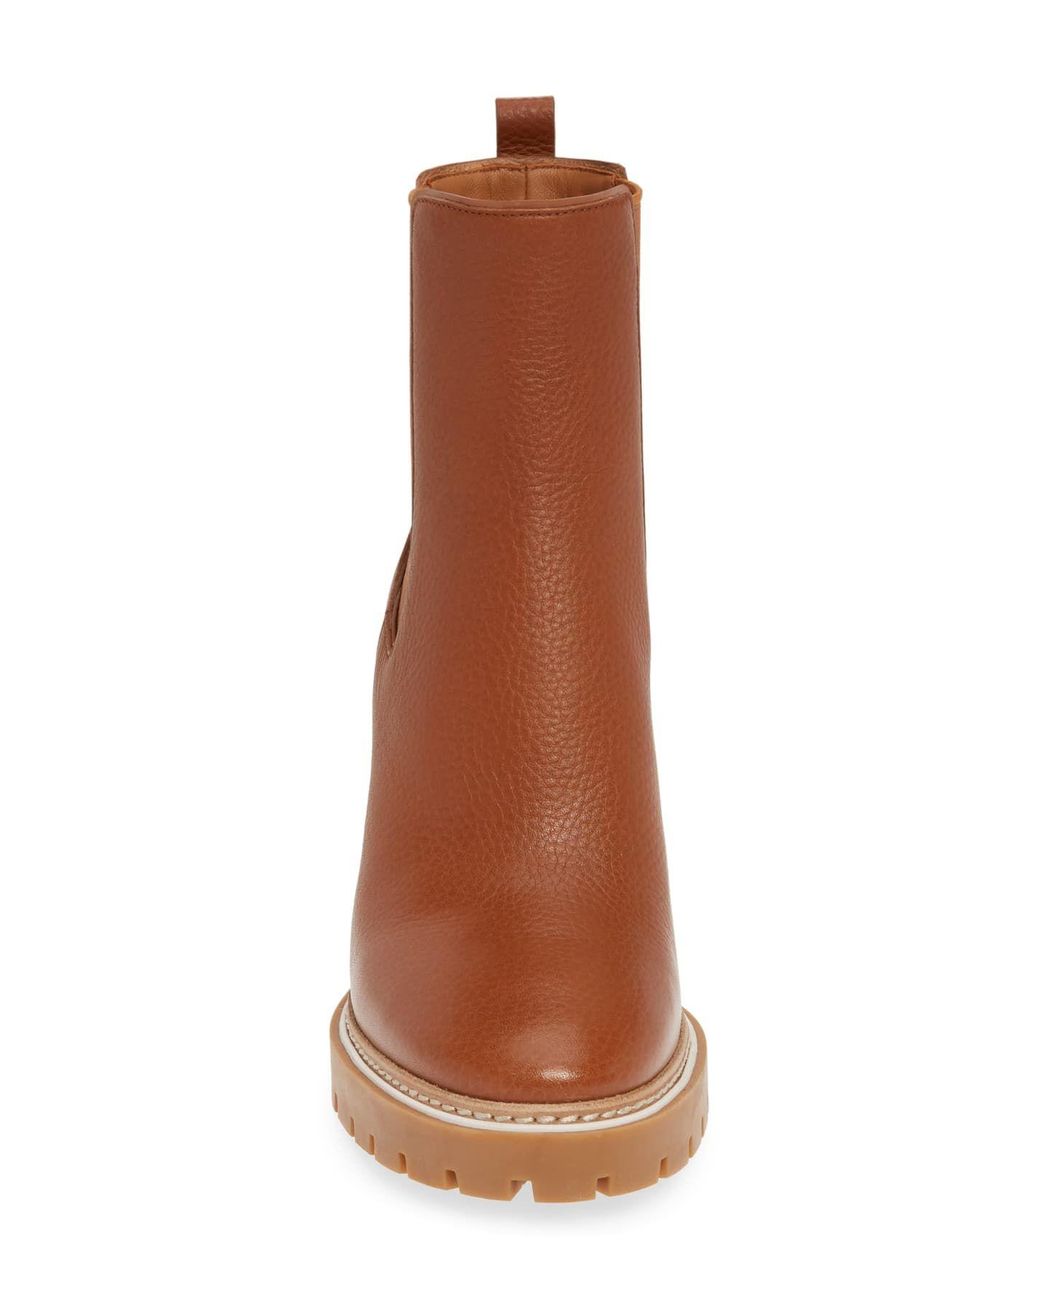 Tory Burch Leather Miller Chelsea Boot in Tan / Tan (Brown) | Lyst